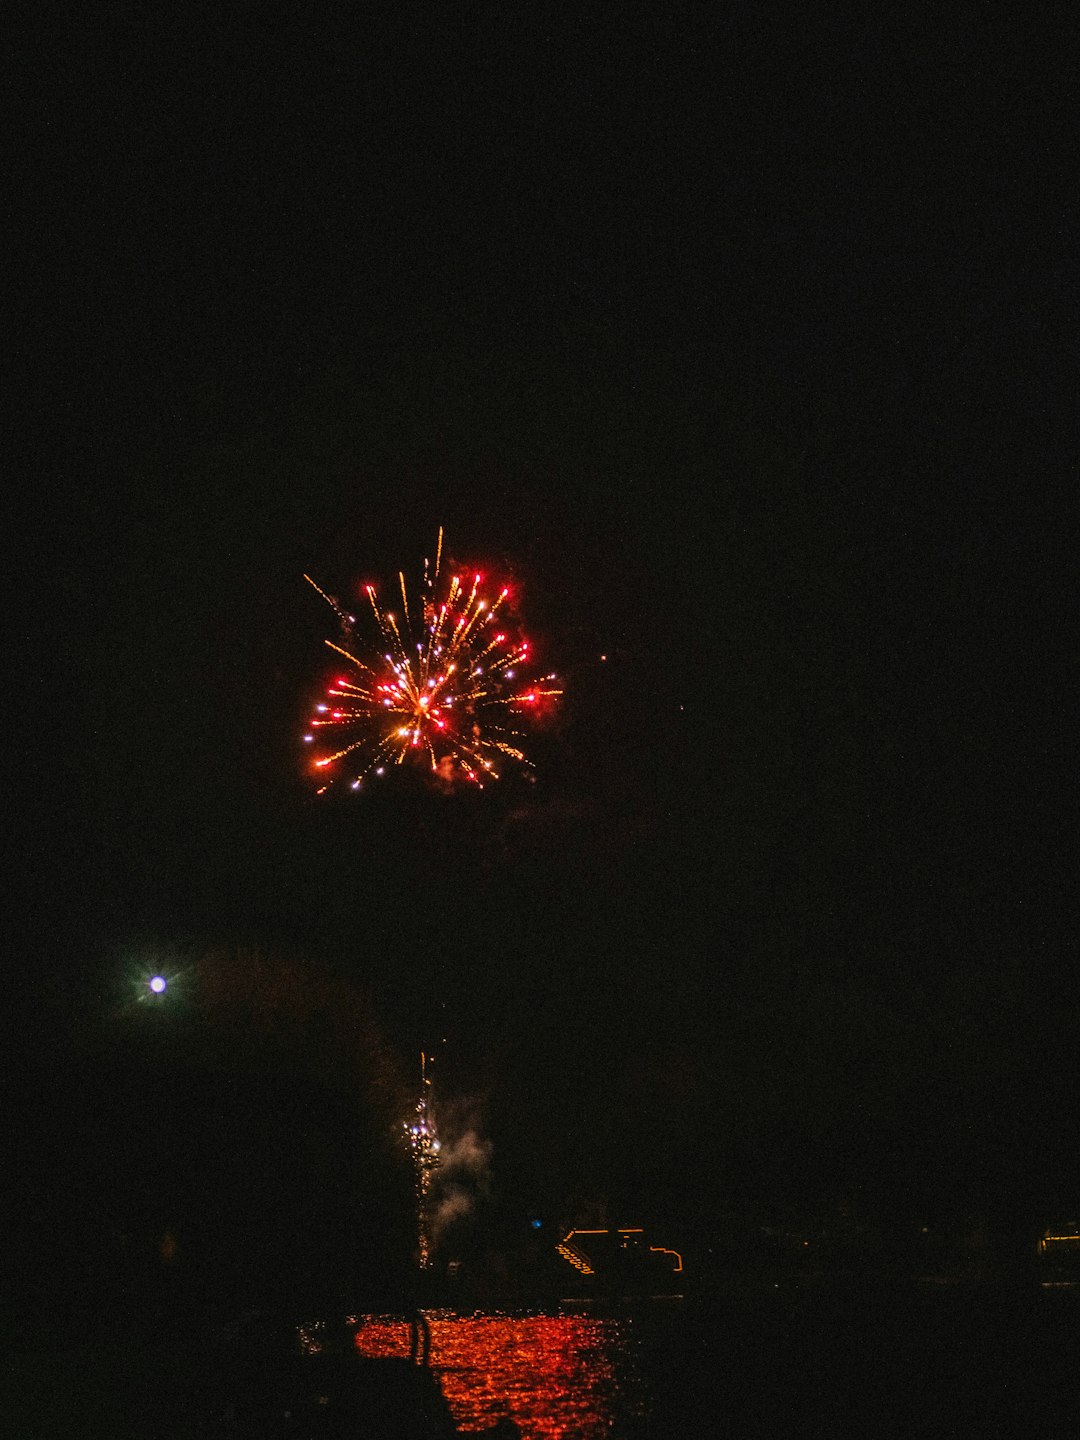 red and yellow fireworks display during night time